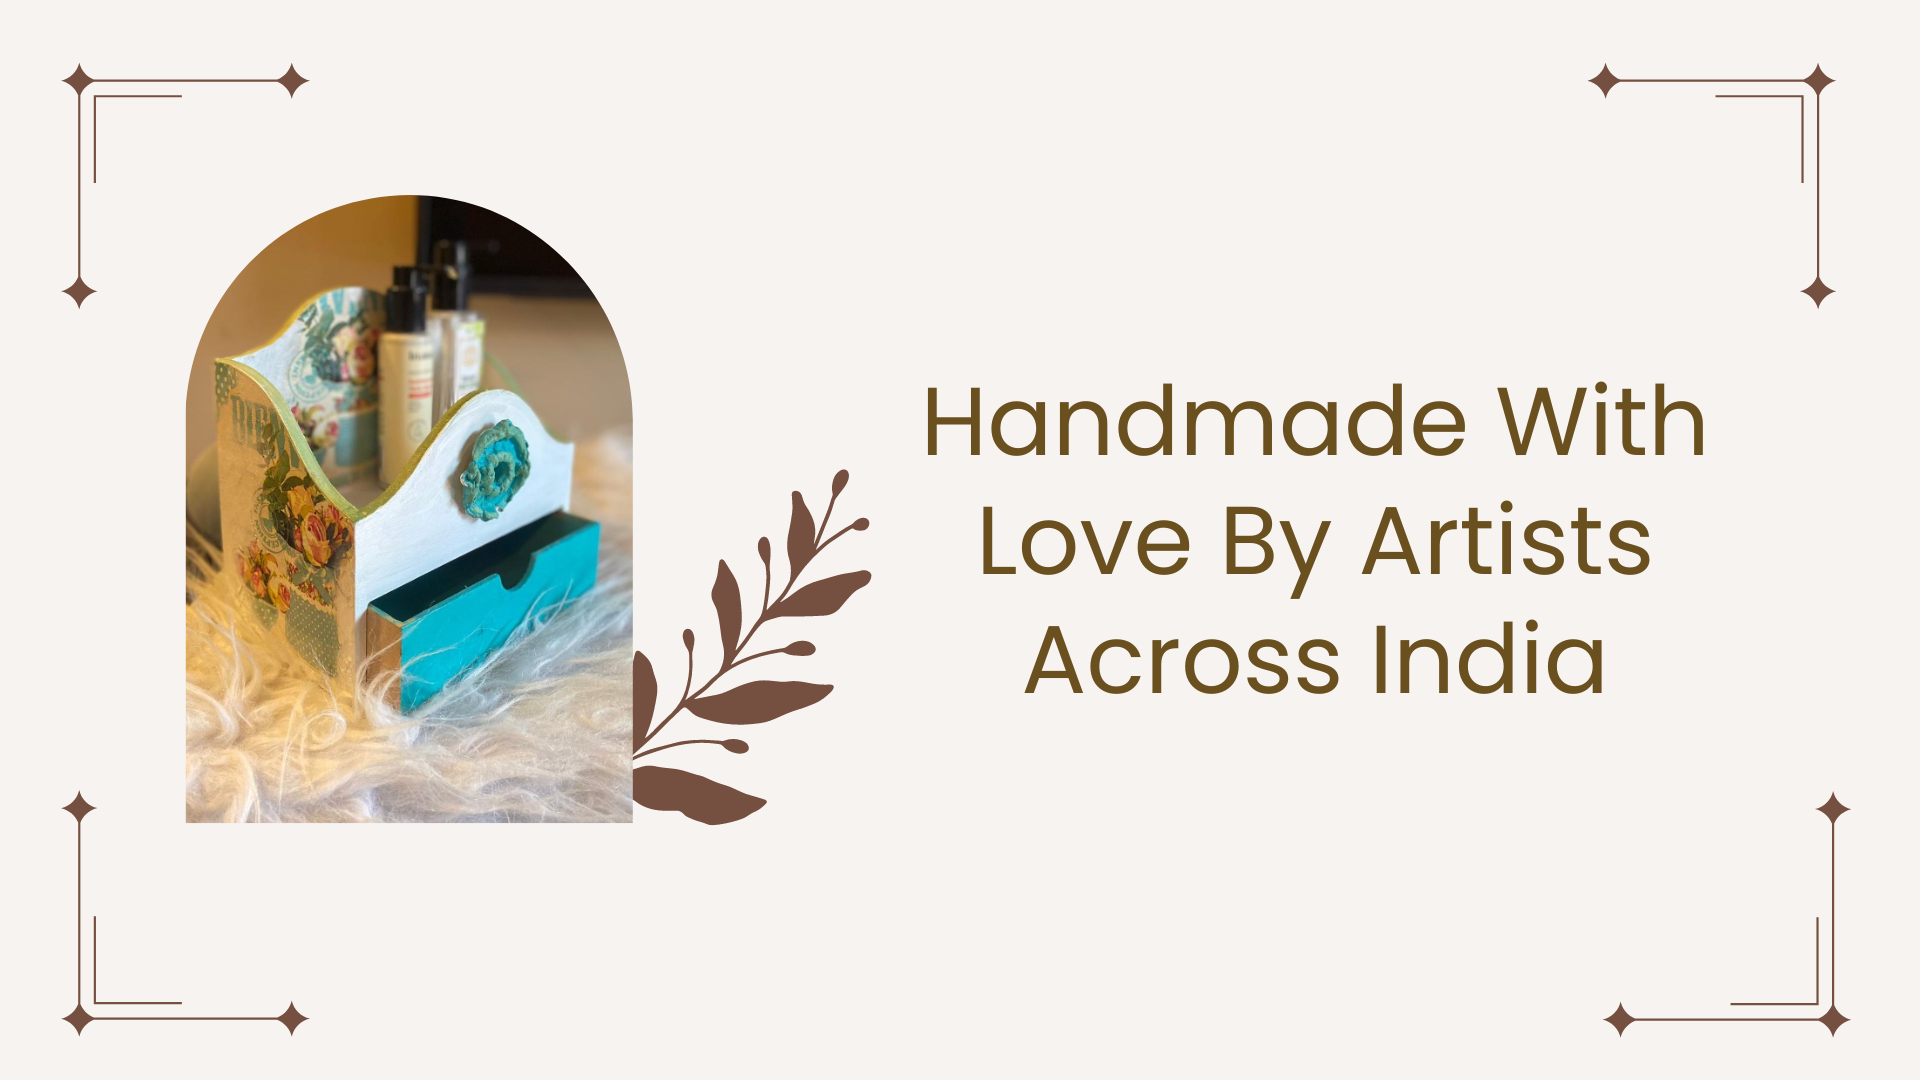 Handmade With Love By Artists Across India